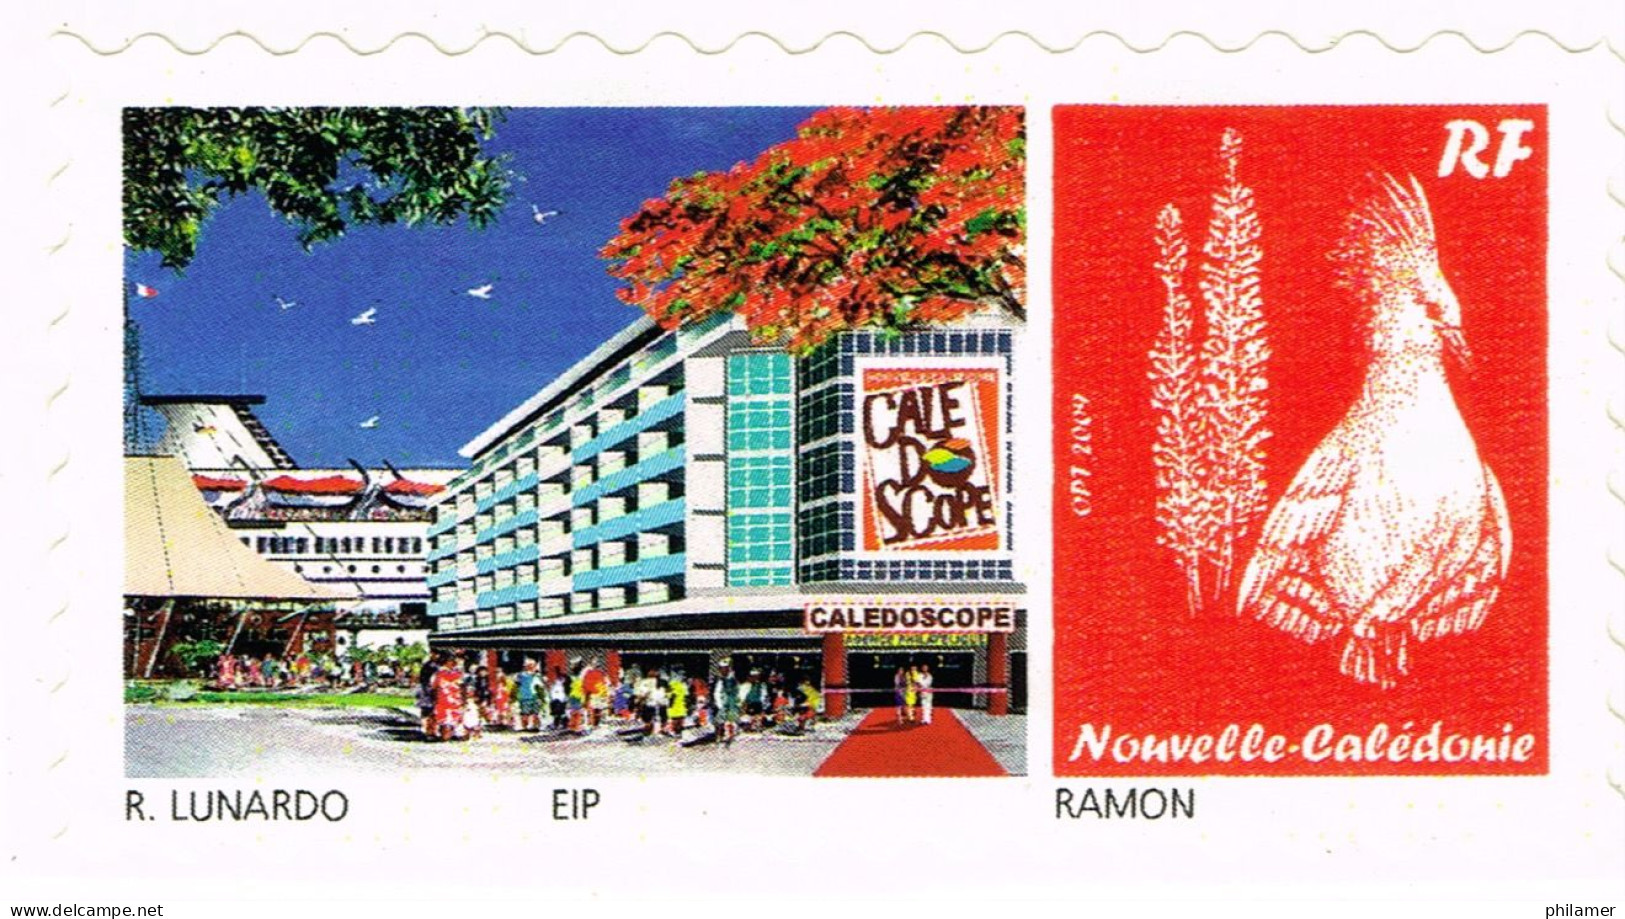 NOUVELLE CALEDONIE NEW CALEDONIA Timbre A Moi Personnalis Public YT 1187 TPNC21 Caledoscope 2012 Ramon Neuf B - Nuovi